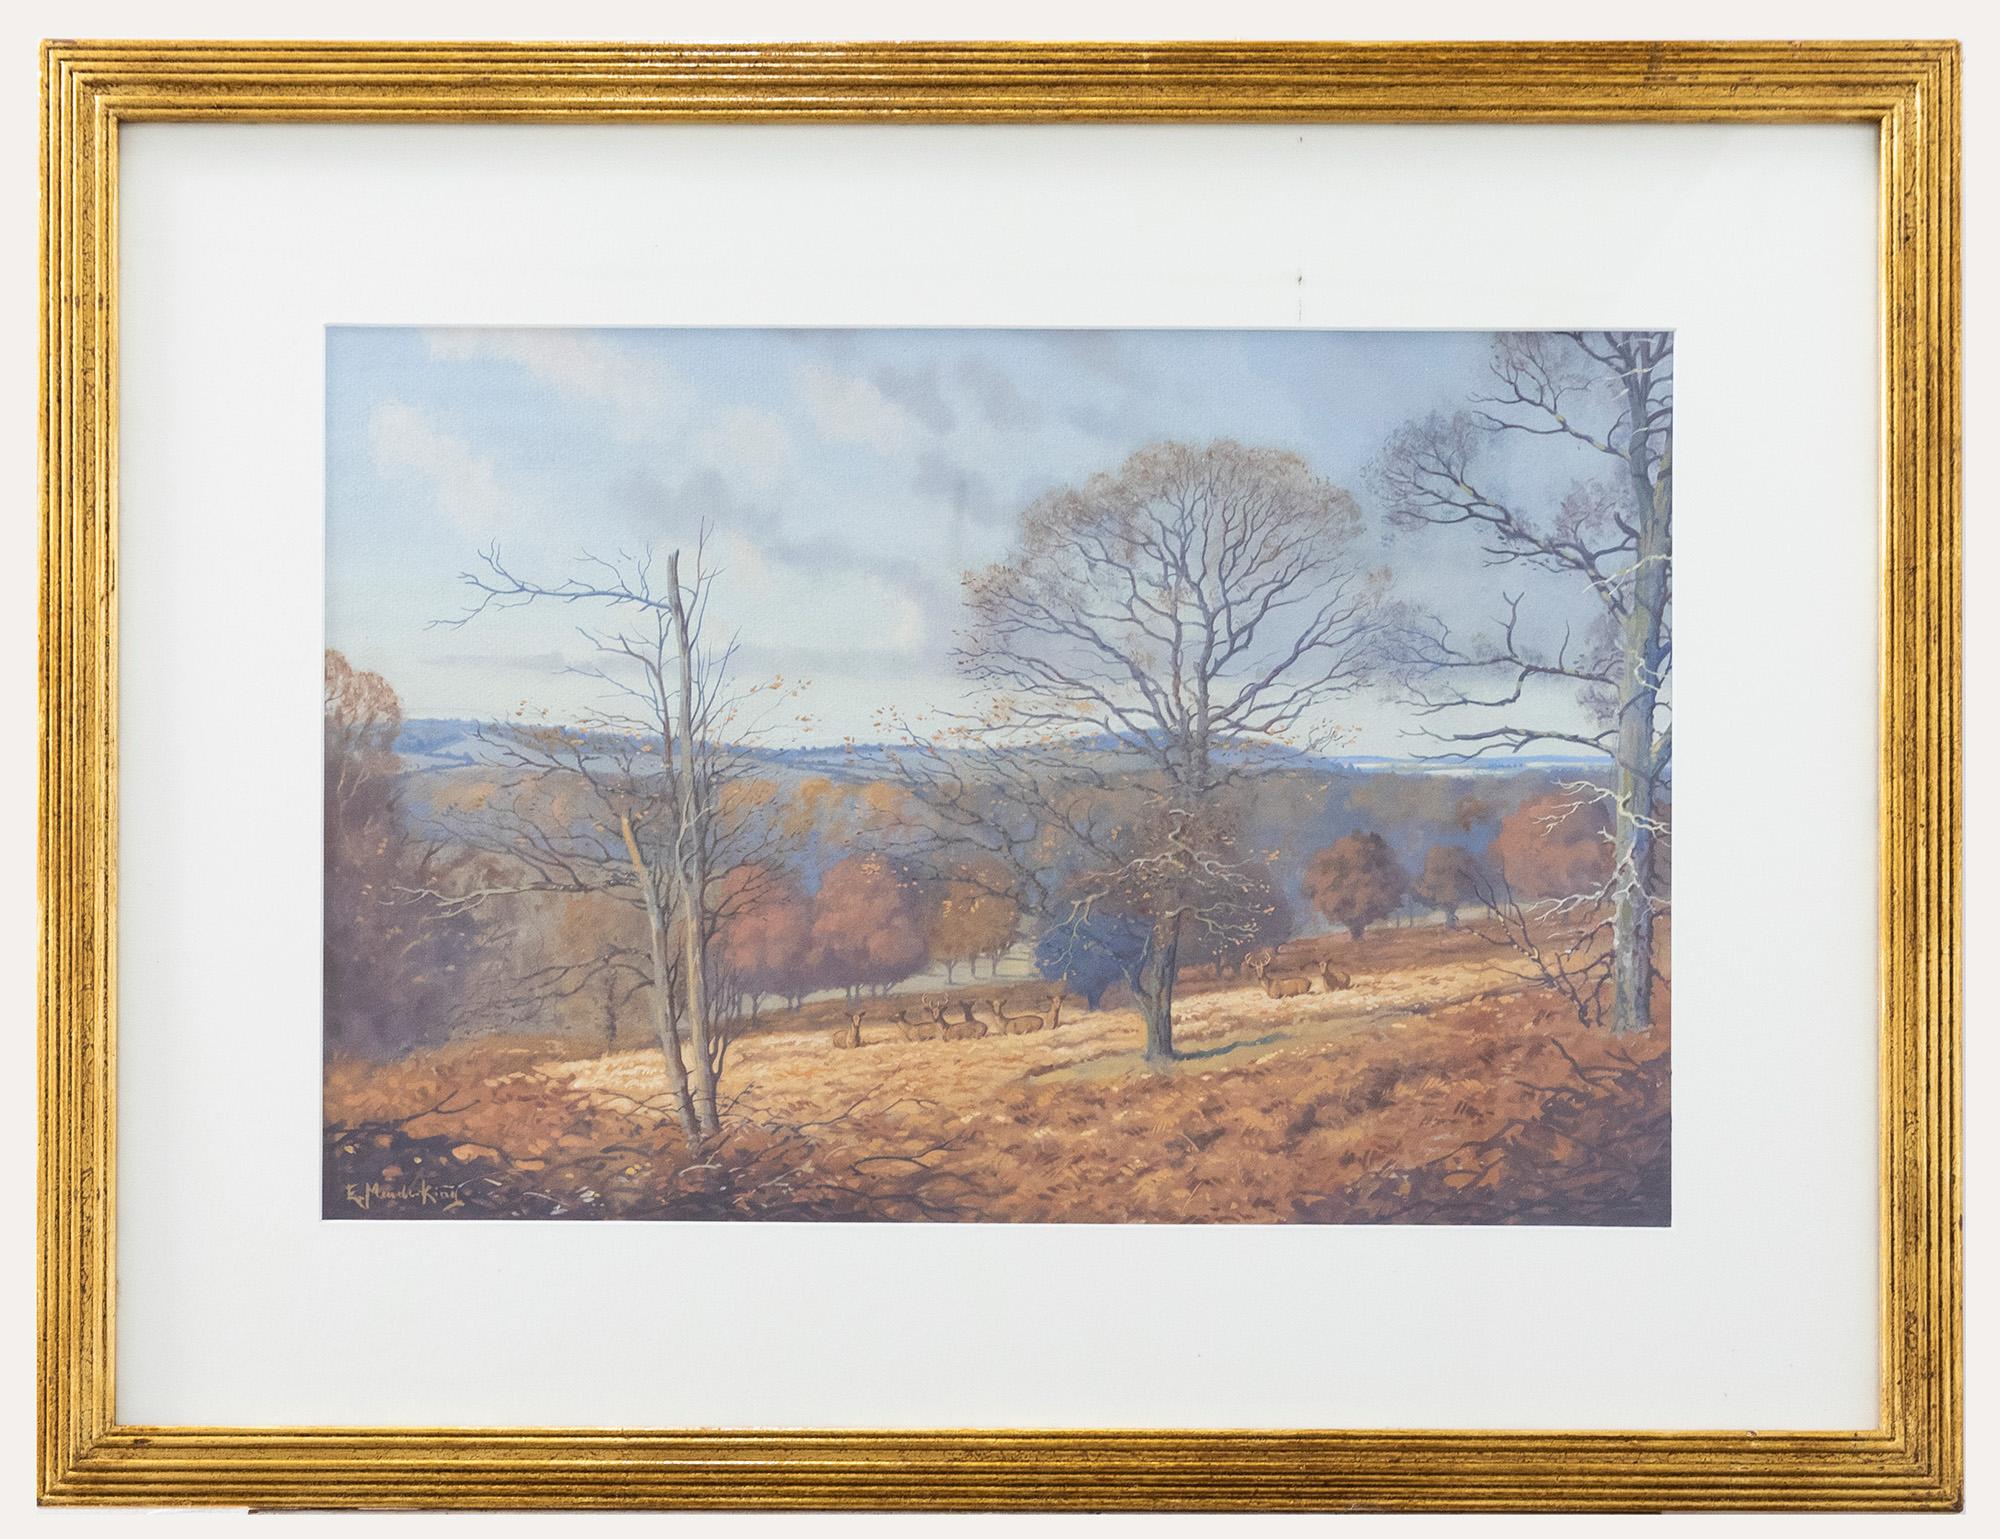 An attractive watercolour painting of red deer camouflaged amongst autumn colour at Eastnor Park. The artist has used gouache in areas to highlight elements of the landscape. The painting has been well presented in a large reeded frame with a crisp